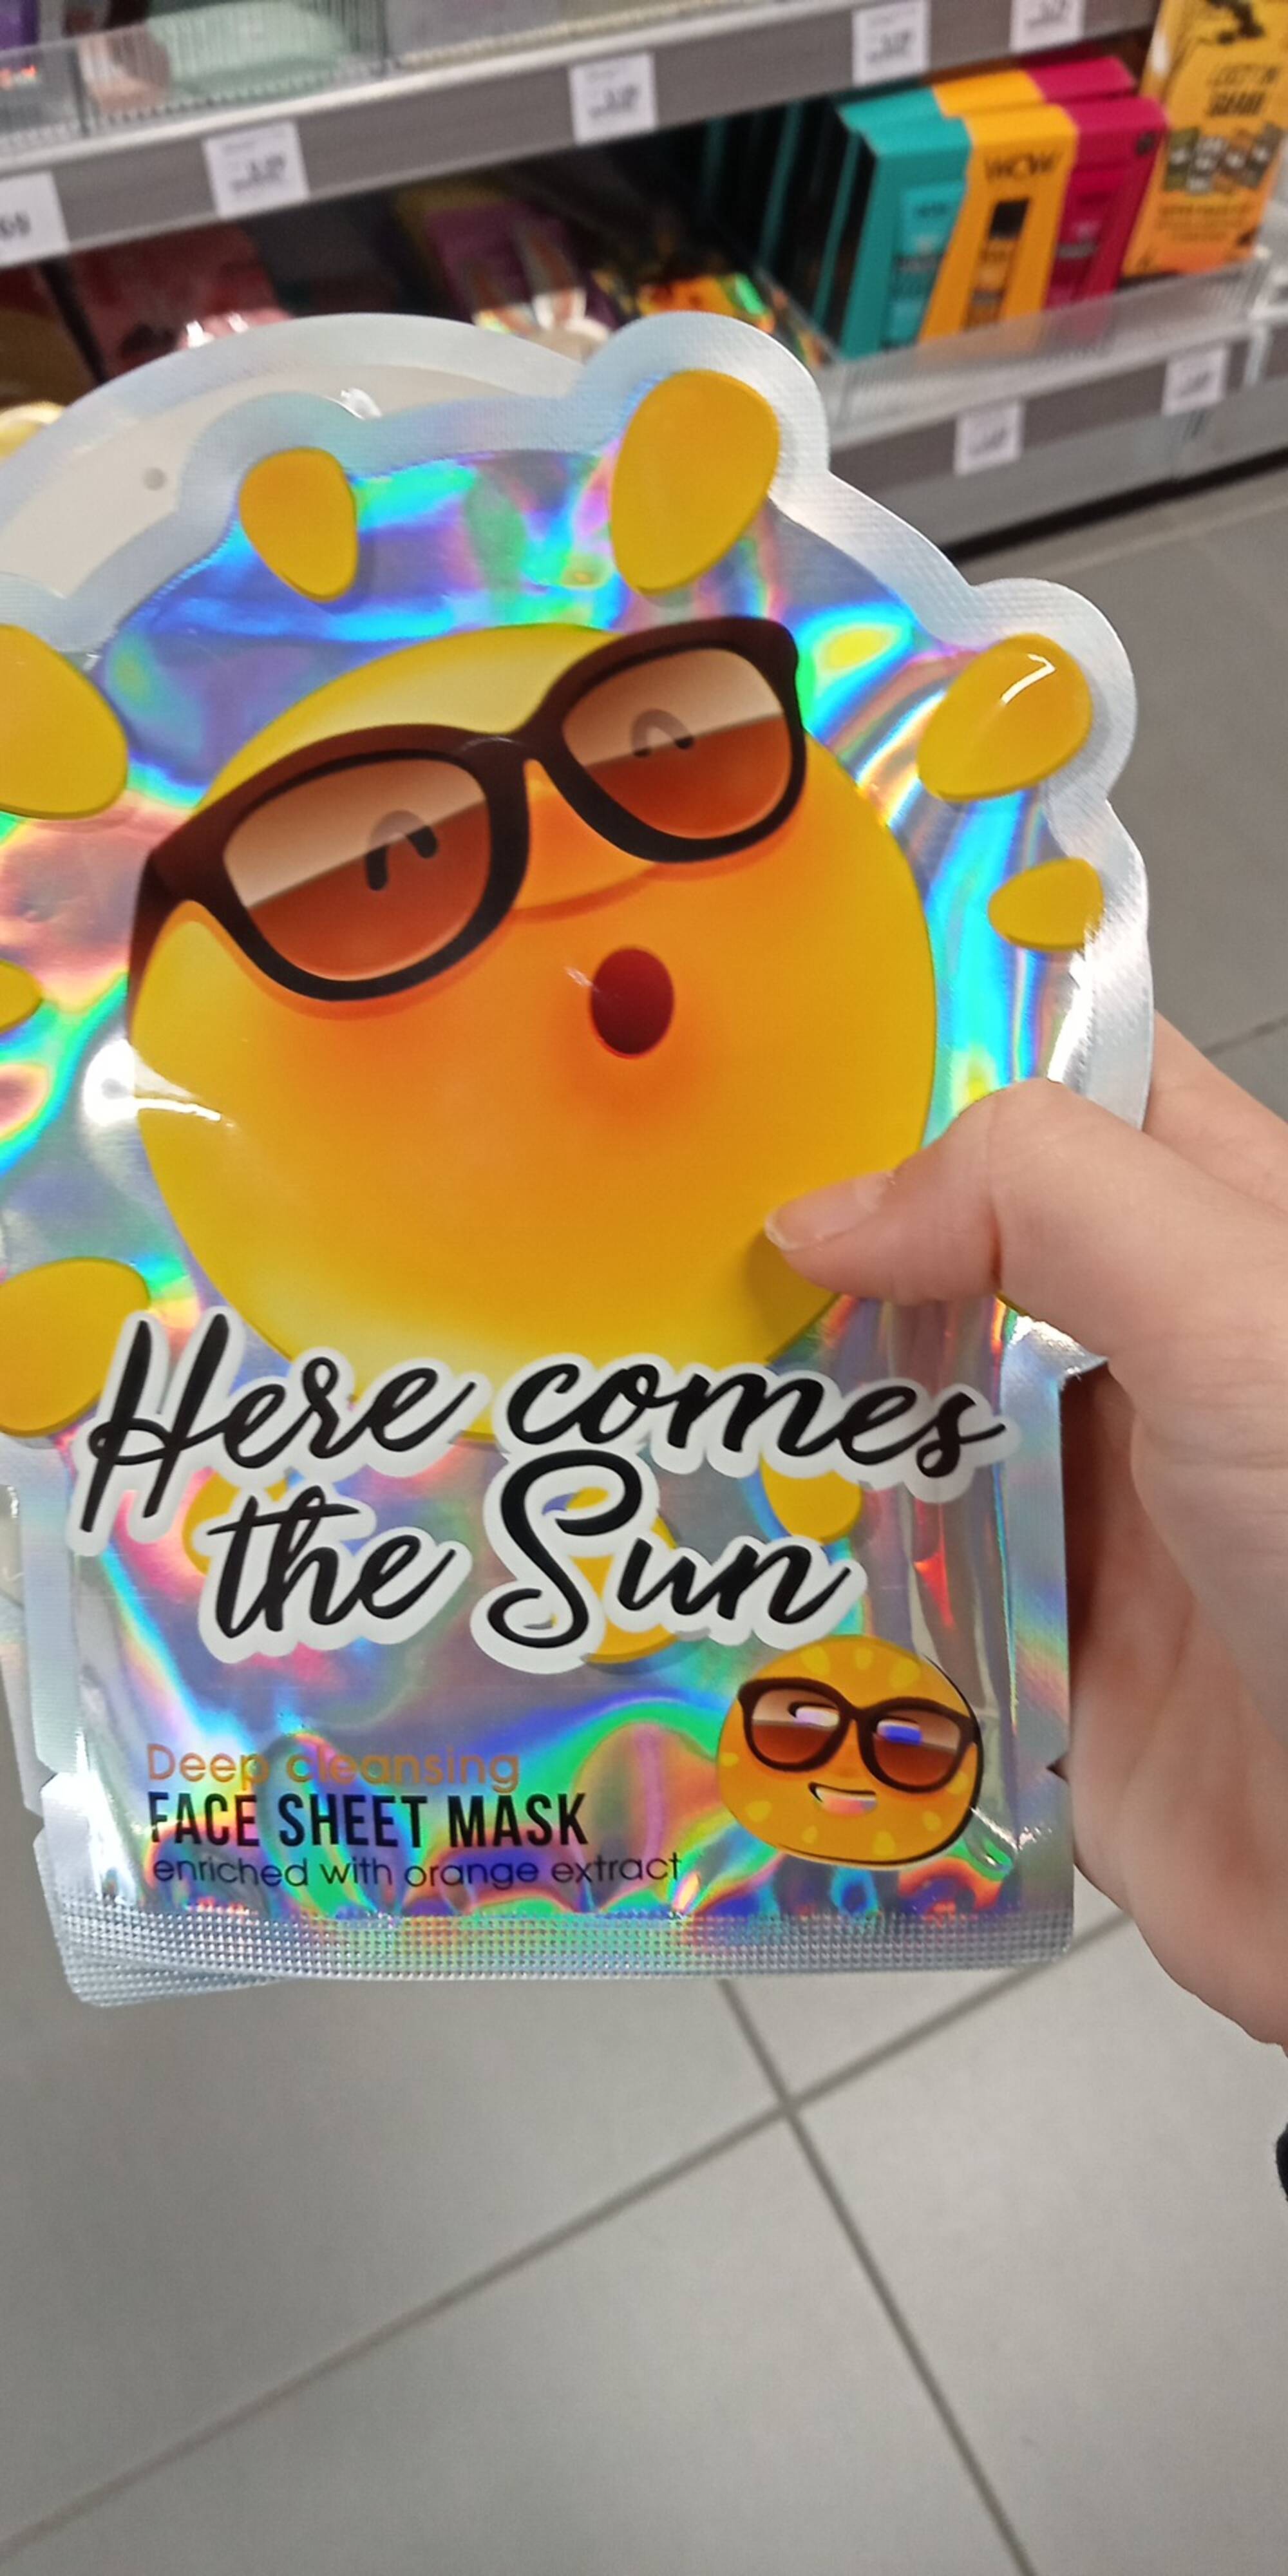 MAXBRANDS - Here comes the sun - Face sheet mask 